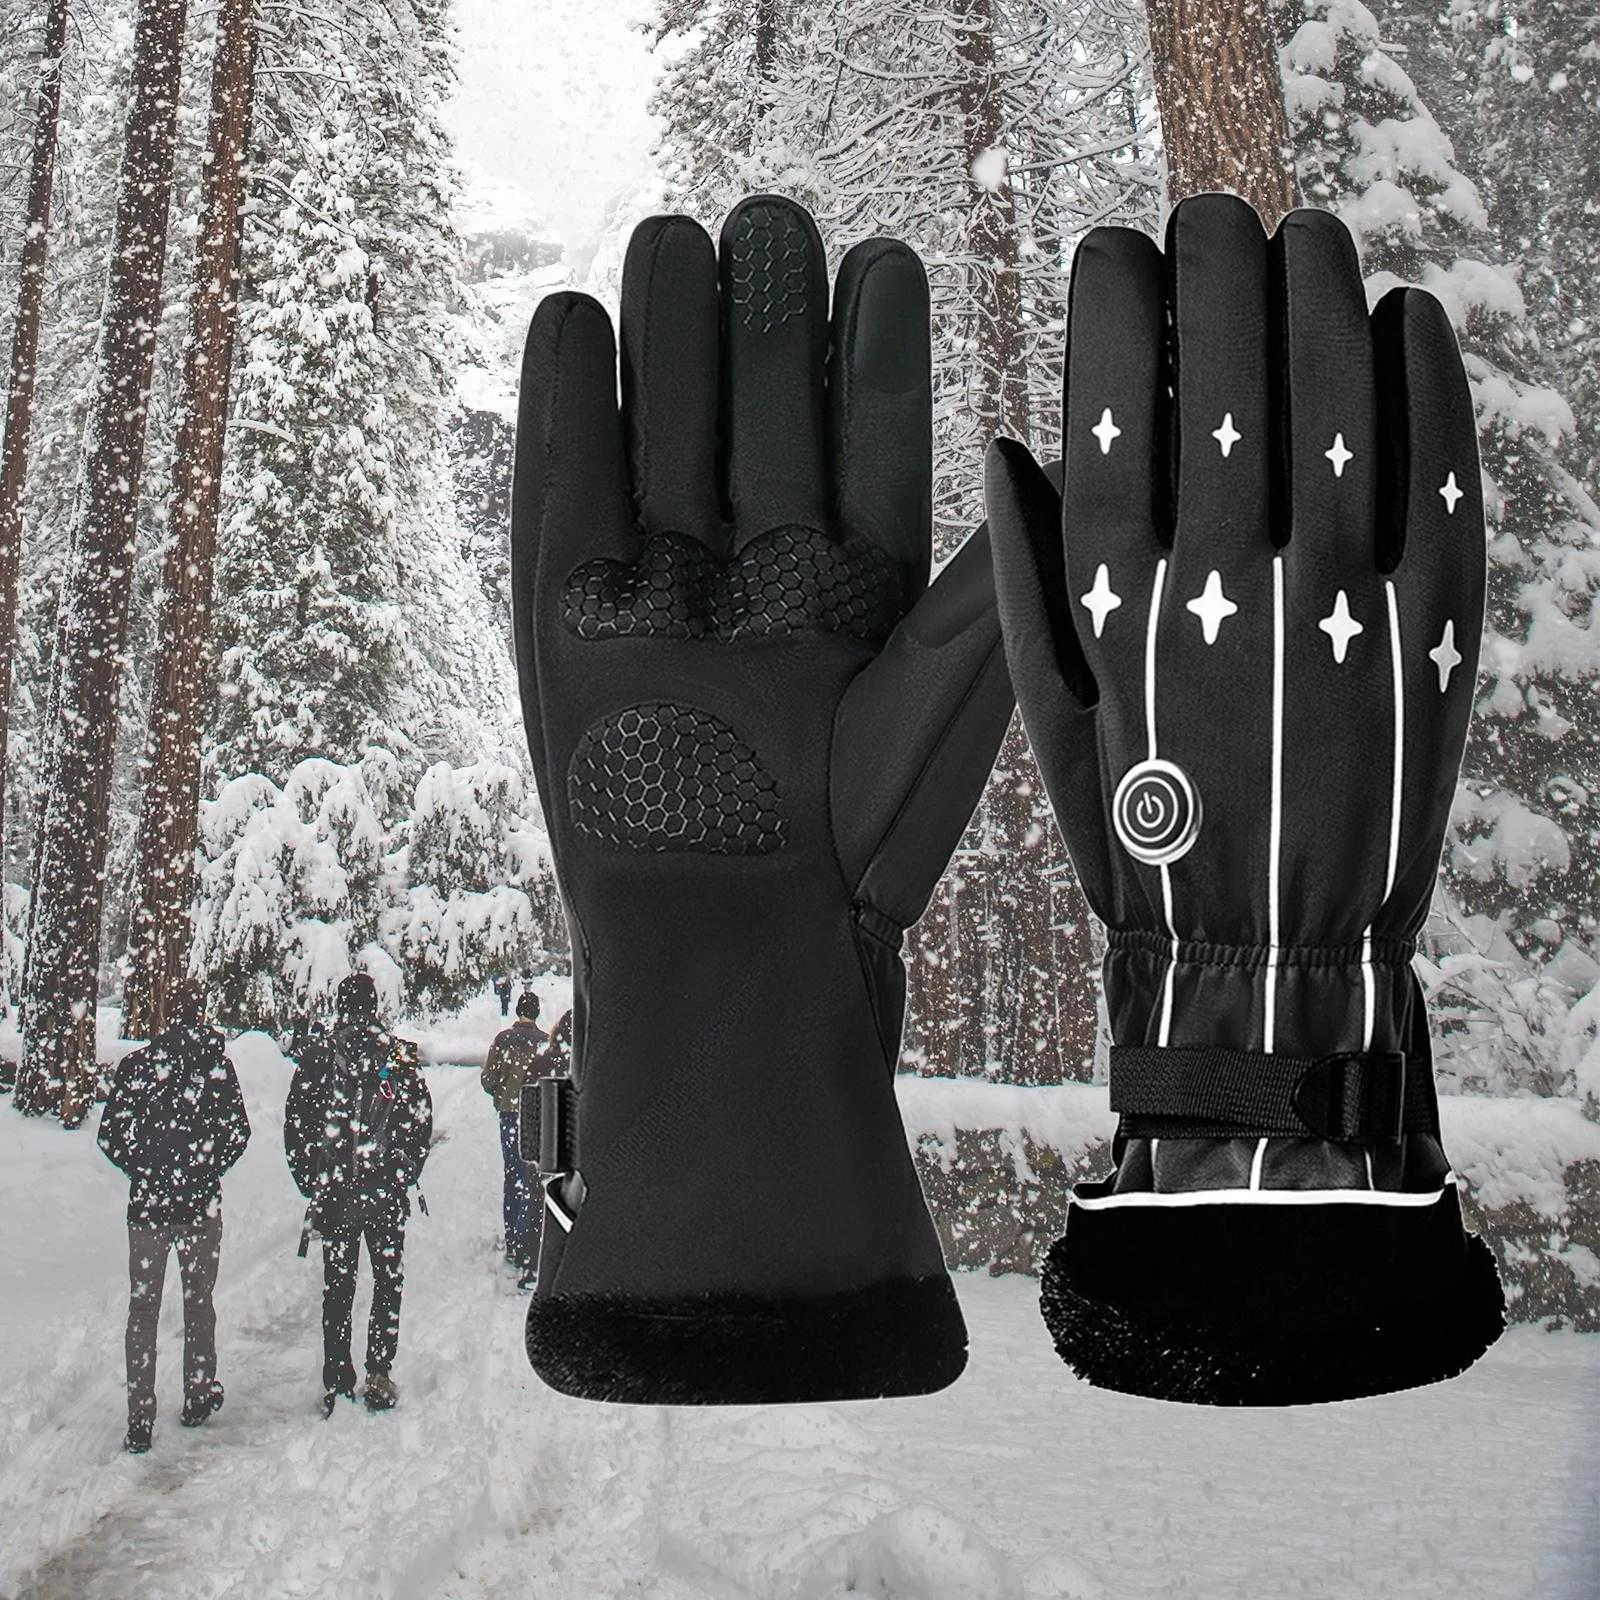 Electric Thermal Heated Gloves Touch Screen Adjustable Warm for Hiking Ski